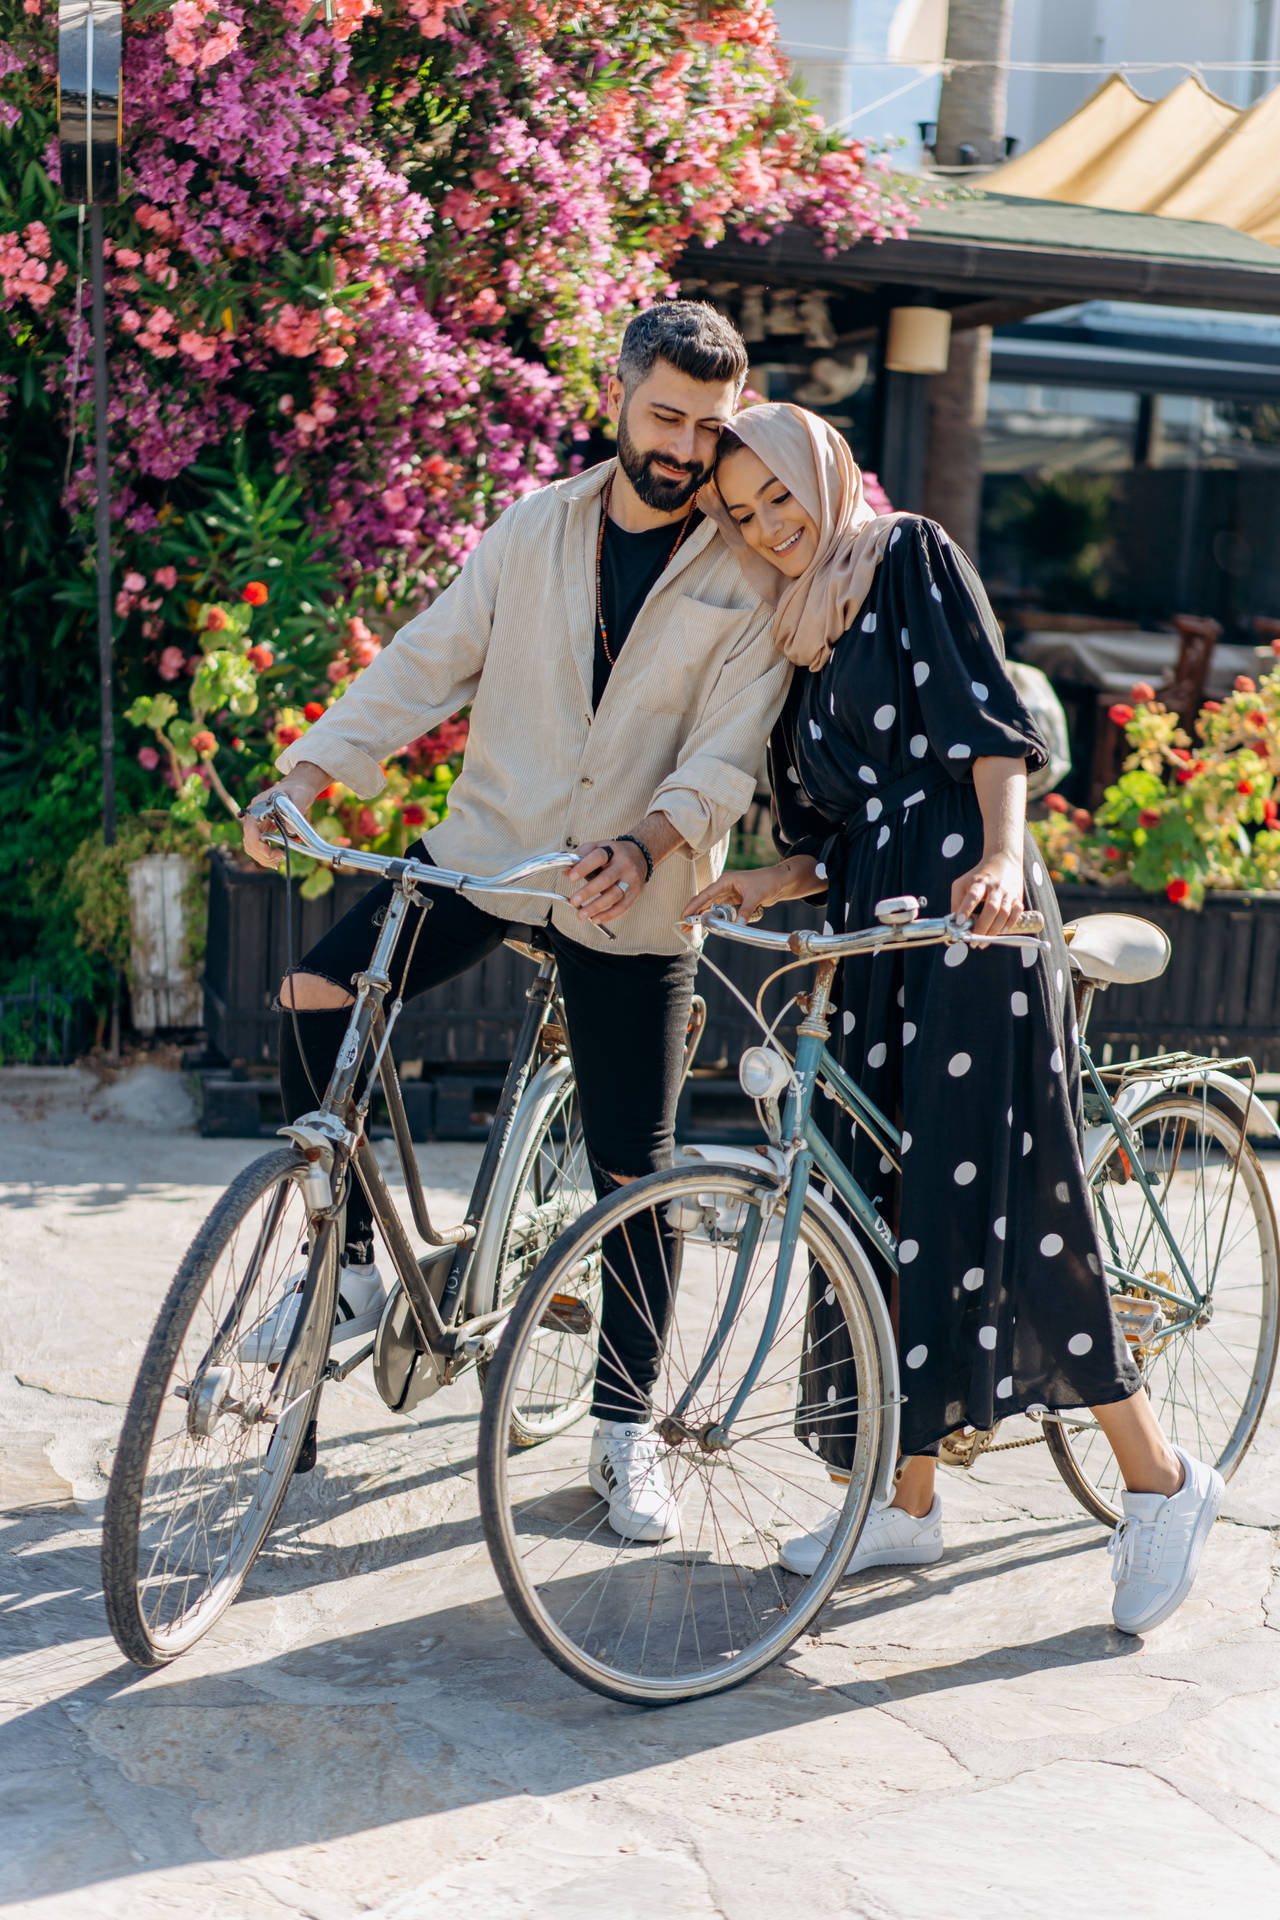 Muslim Couple With Bicycles